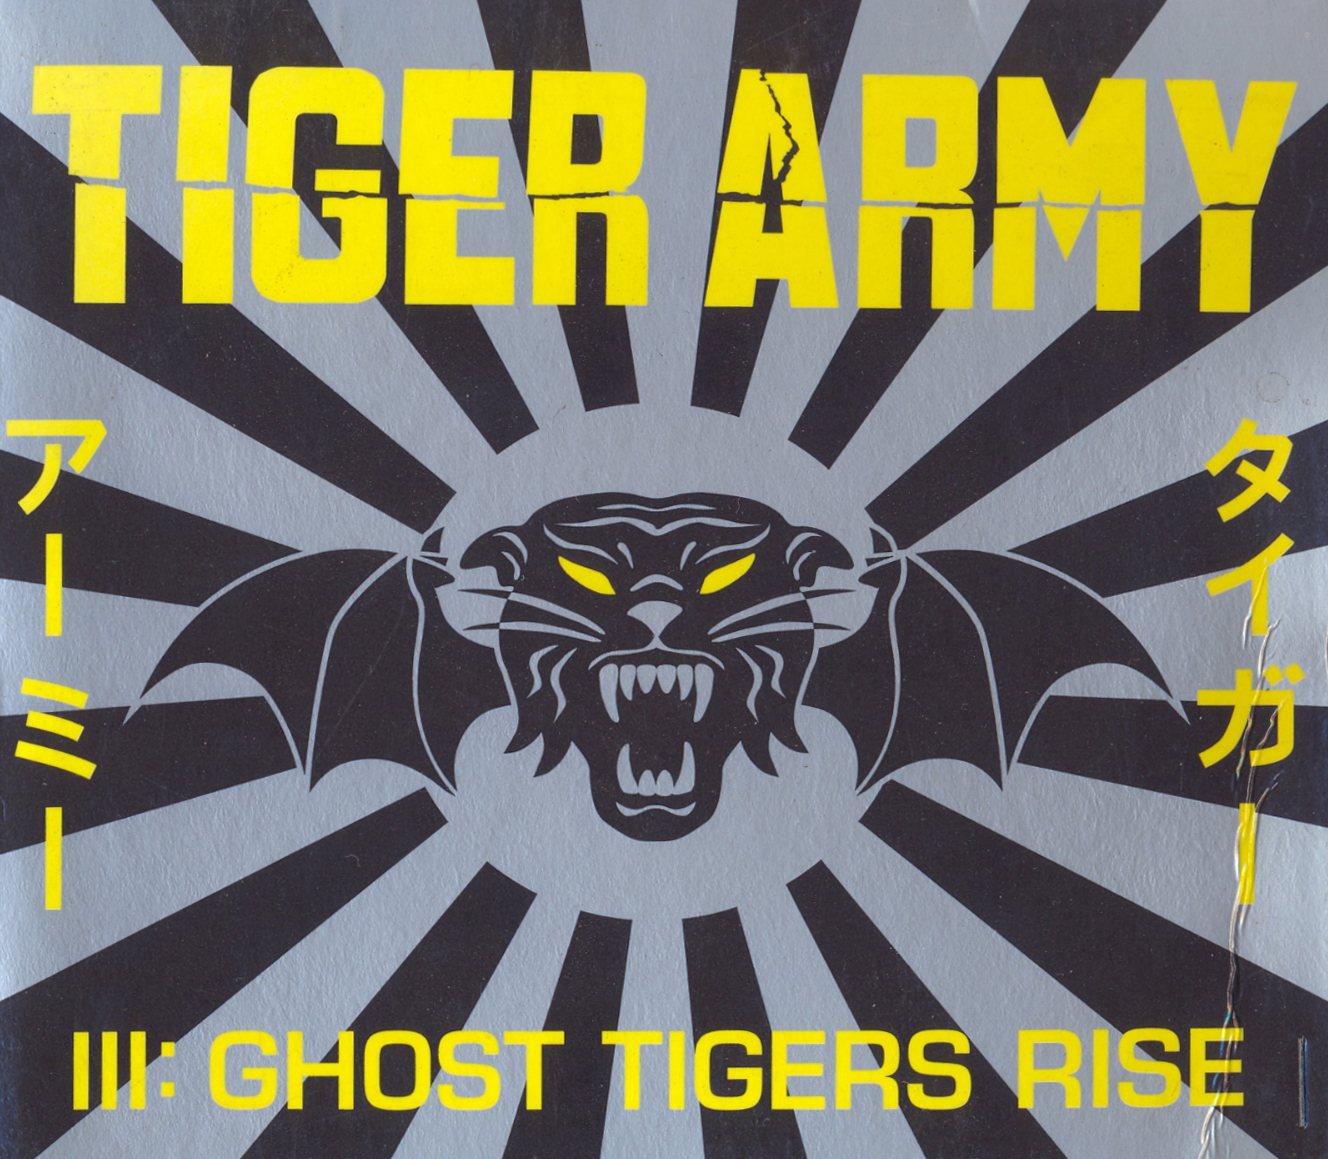 TIGER ARMY Tiger Army III : Ghost Tigers Rise, psychobilly из Калифорнии, размер 69.70 Mb